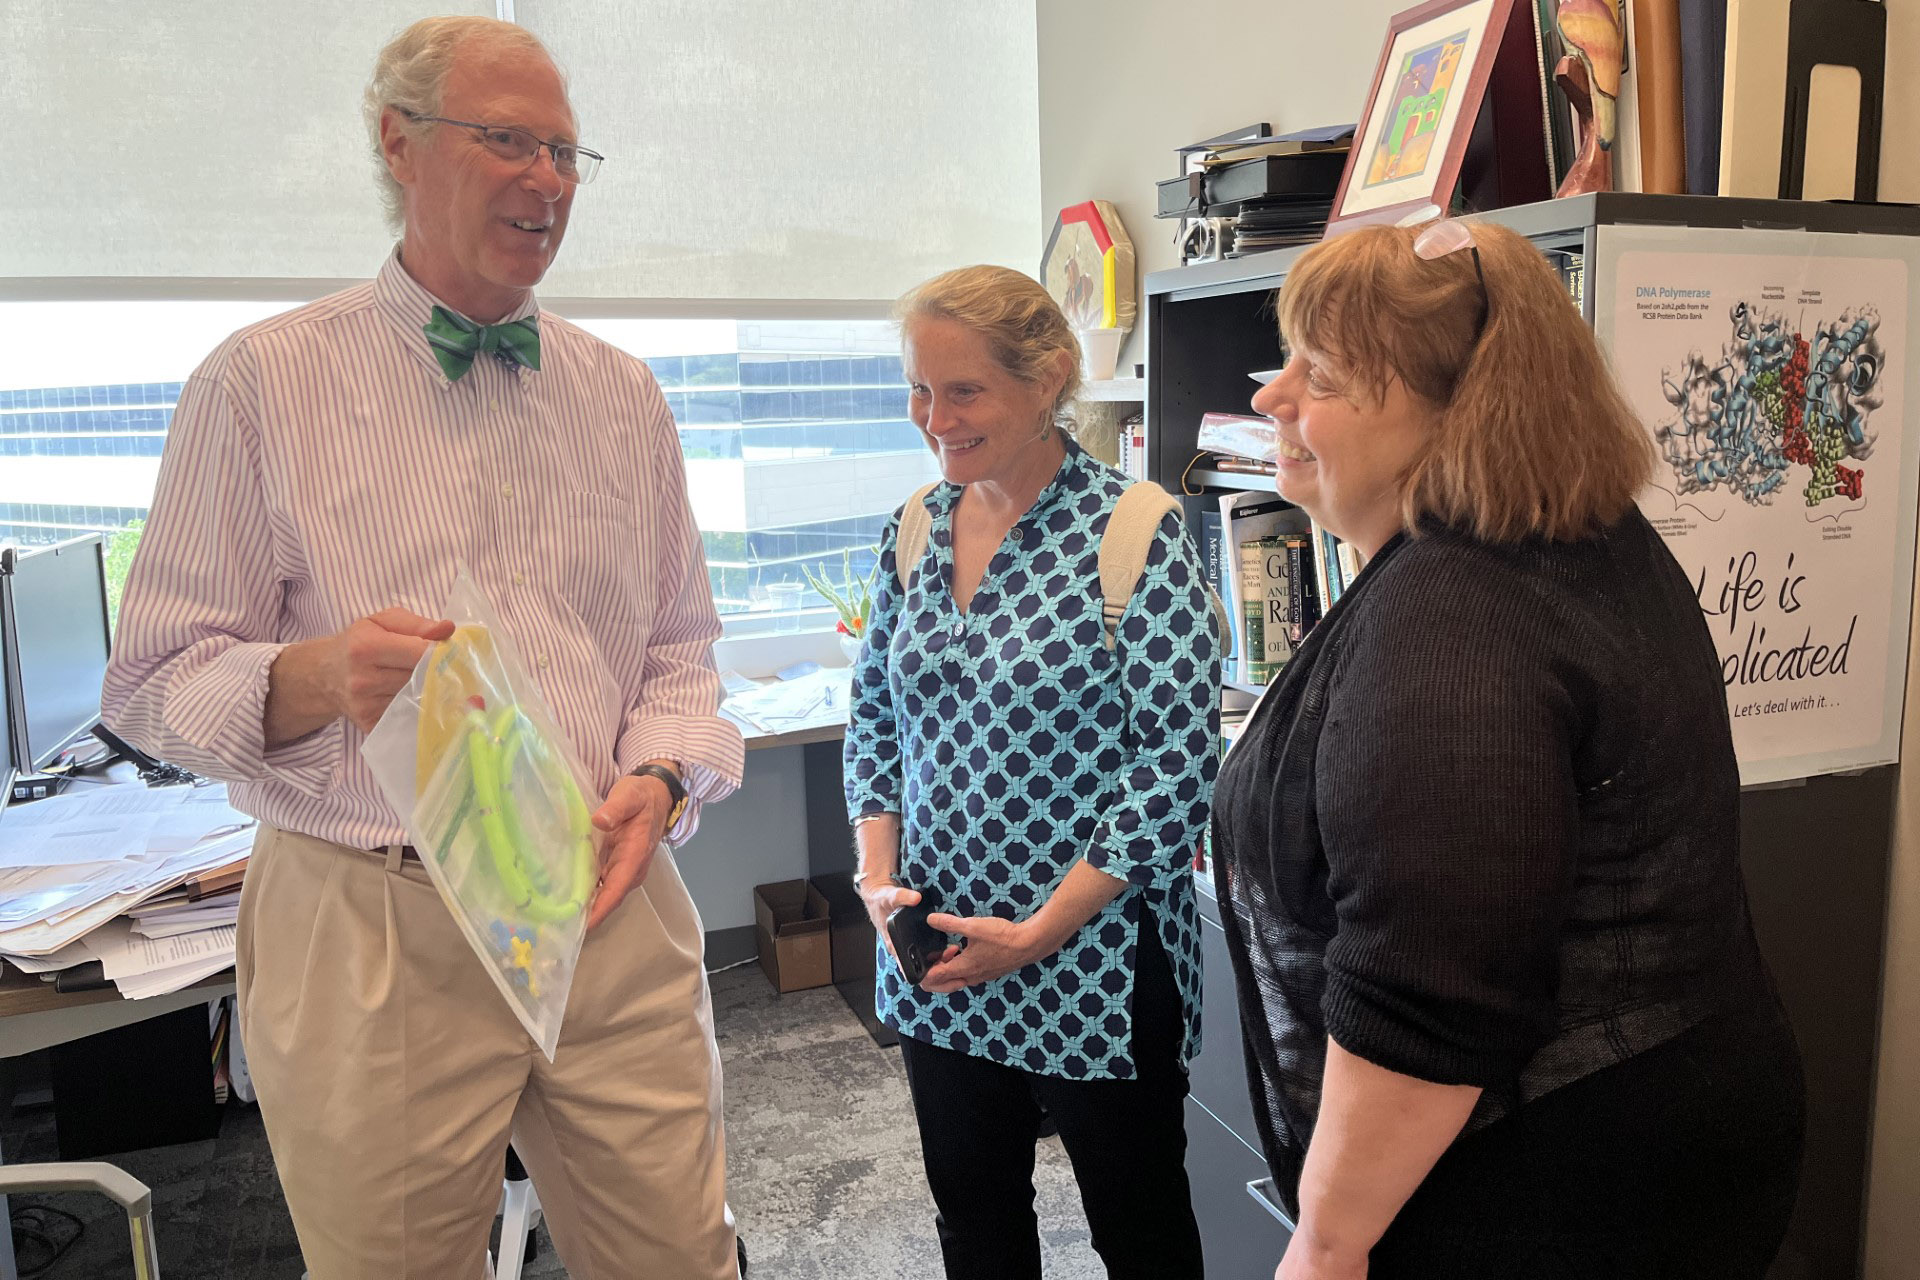 From left&comma; Maurice Godfrey&comma; PhD&comma; visits with Rita Devine&comma; PhD&comma; assistant director for science administration in the division of intramural research at the National Institutes of Health&comma; and Nancy Bowen&comma; DrPH&comma; with the office of the scientific director for the National Institute of Neurological Disorders and Stroke at the NIH&period;